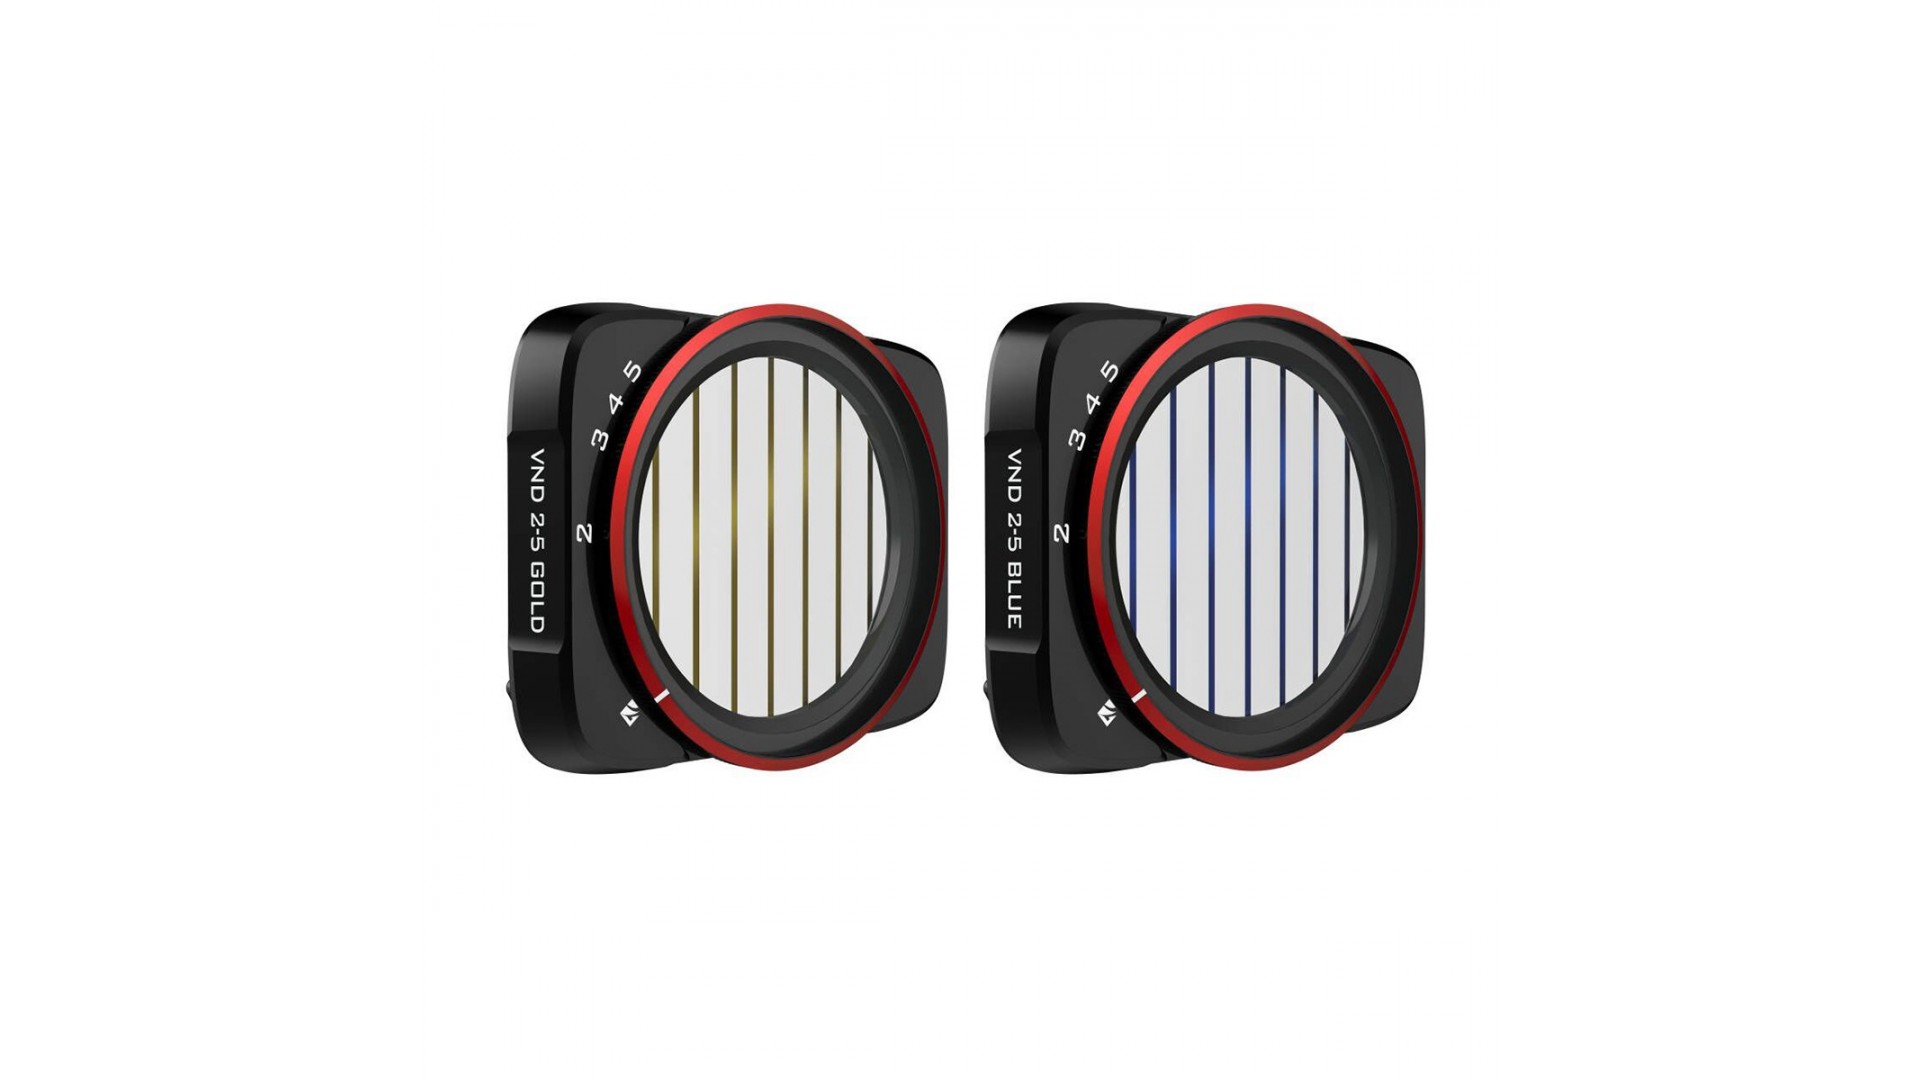 DJI Air 2S Filters Variable ND (VND) 2-5 Blue & Gold Streak